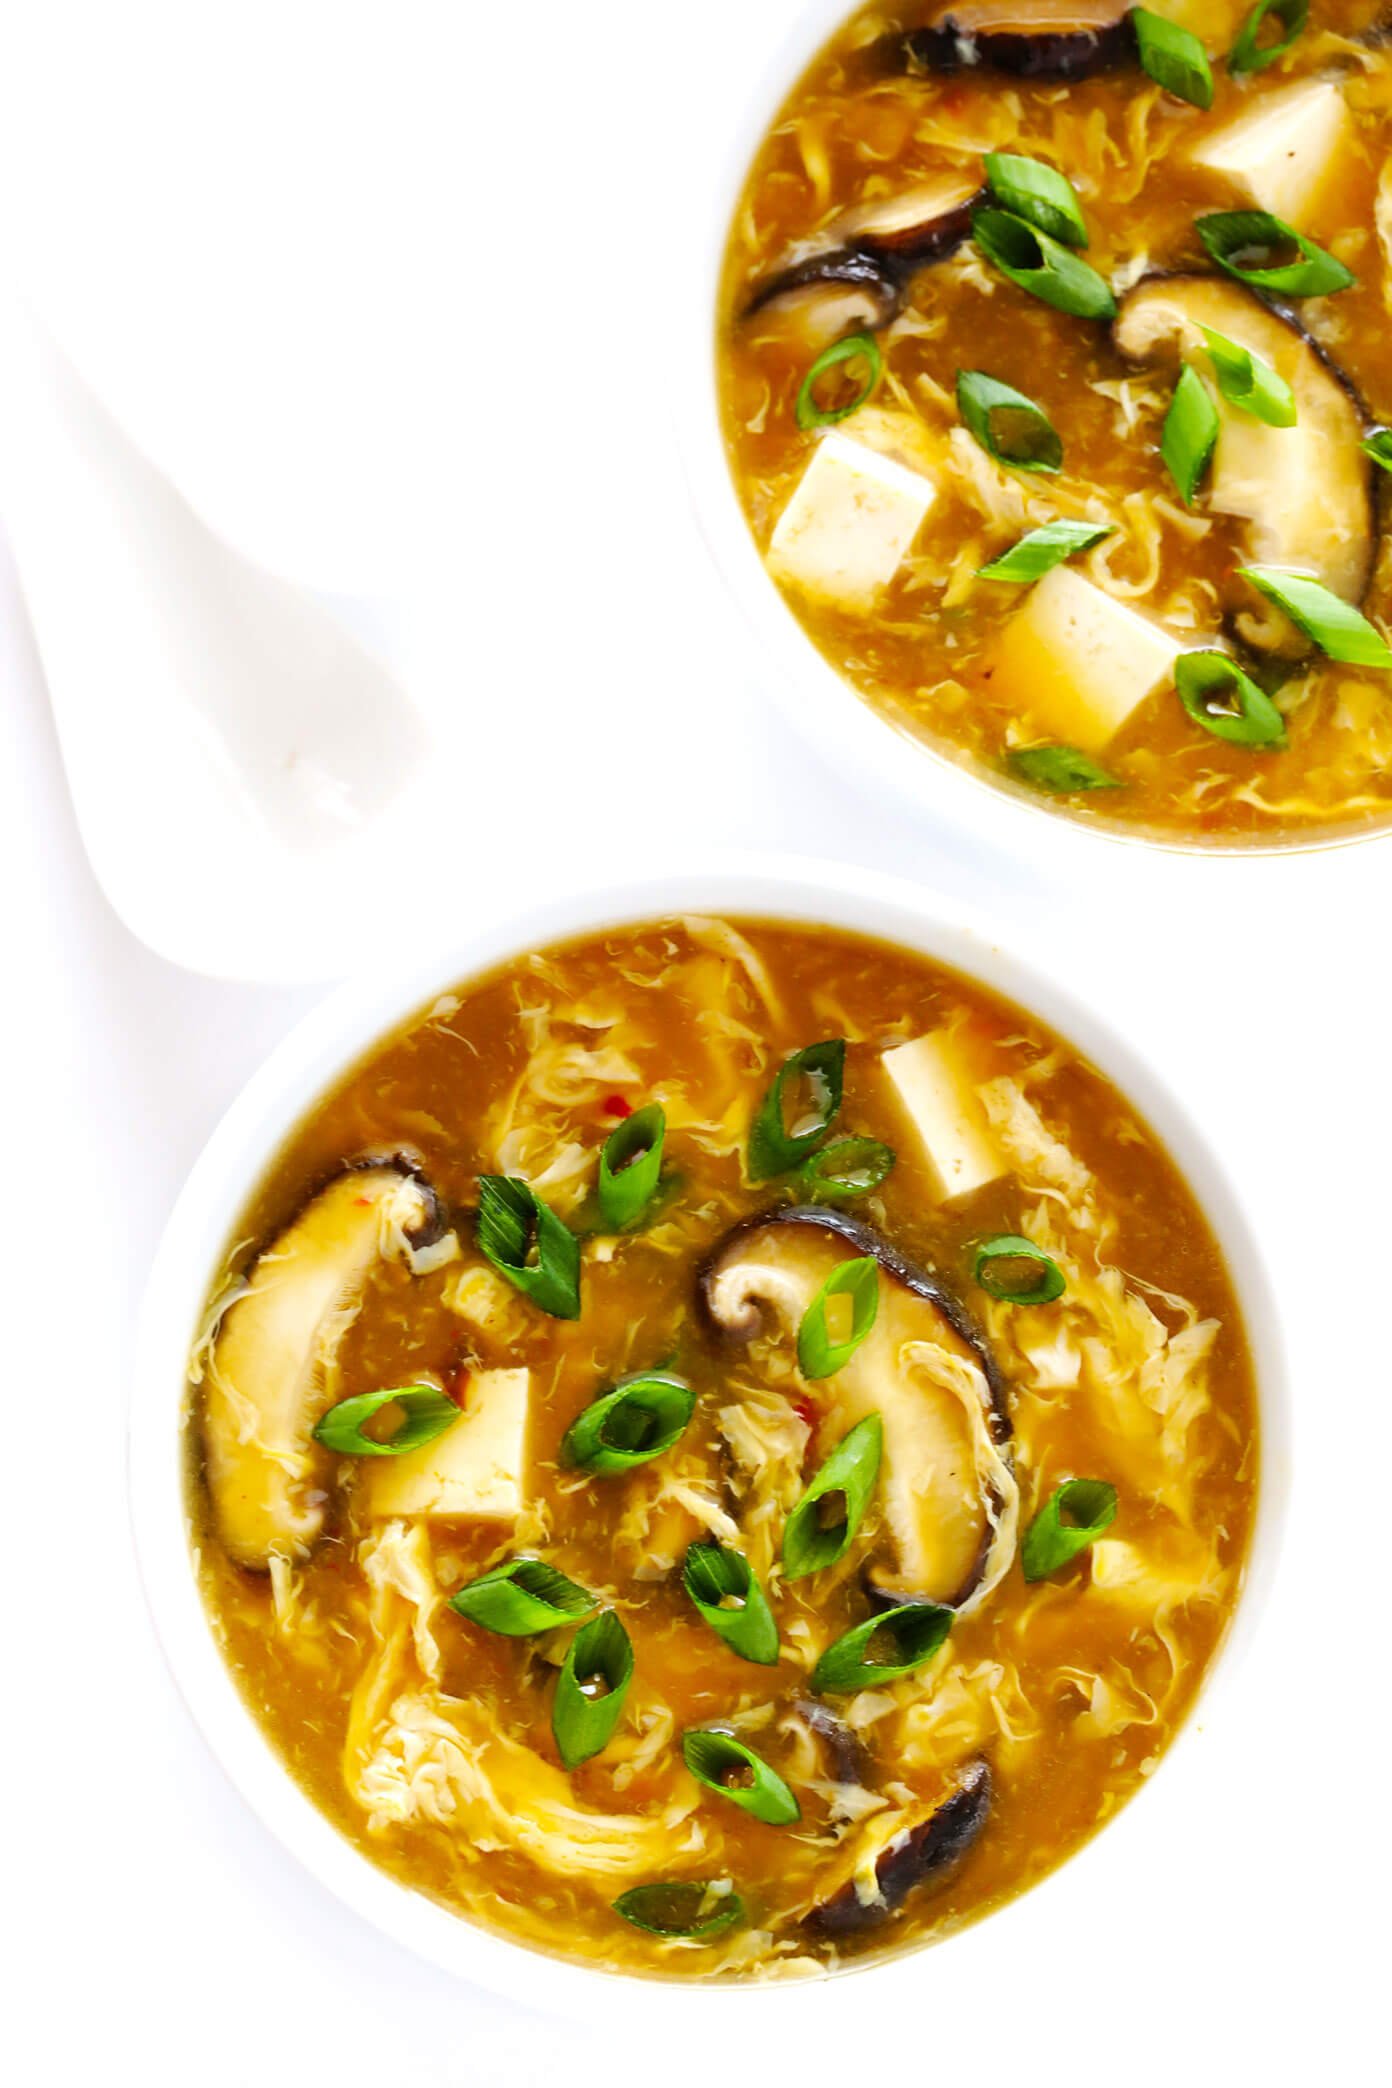 How To Make Hot and Sour Soup